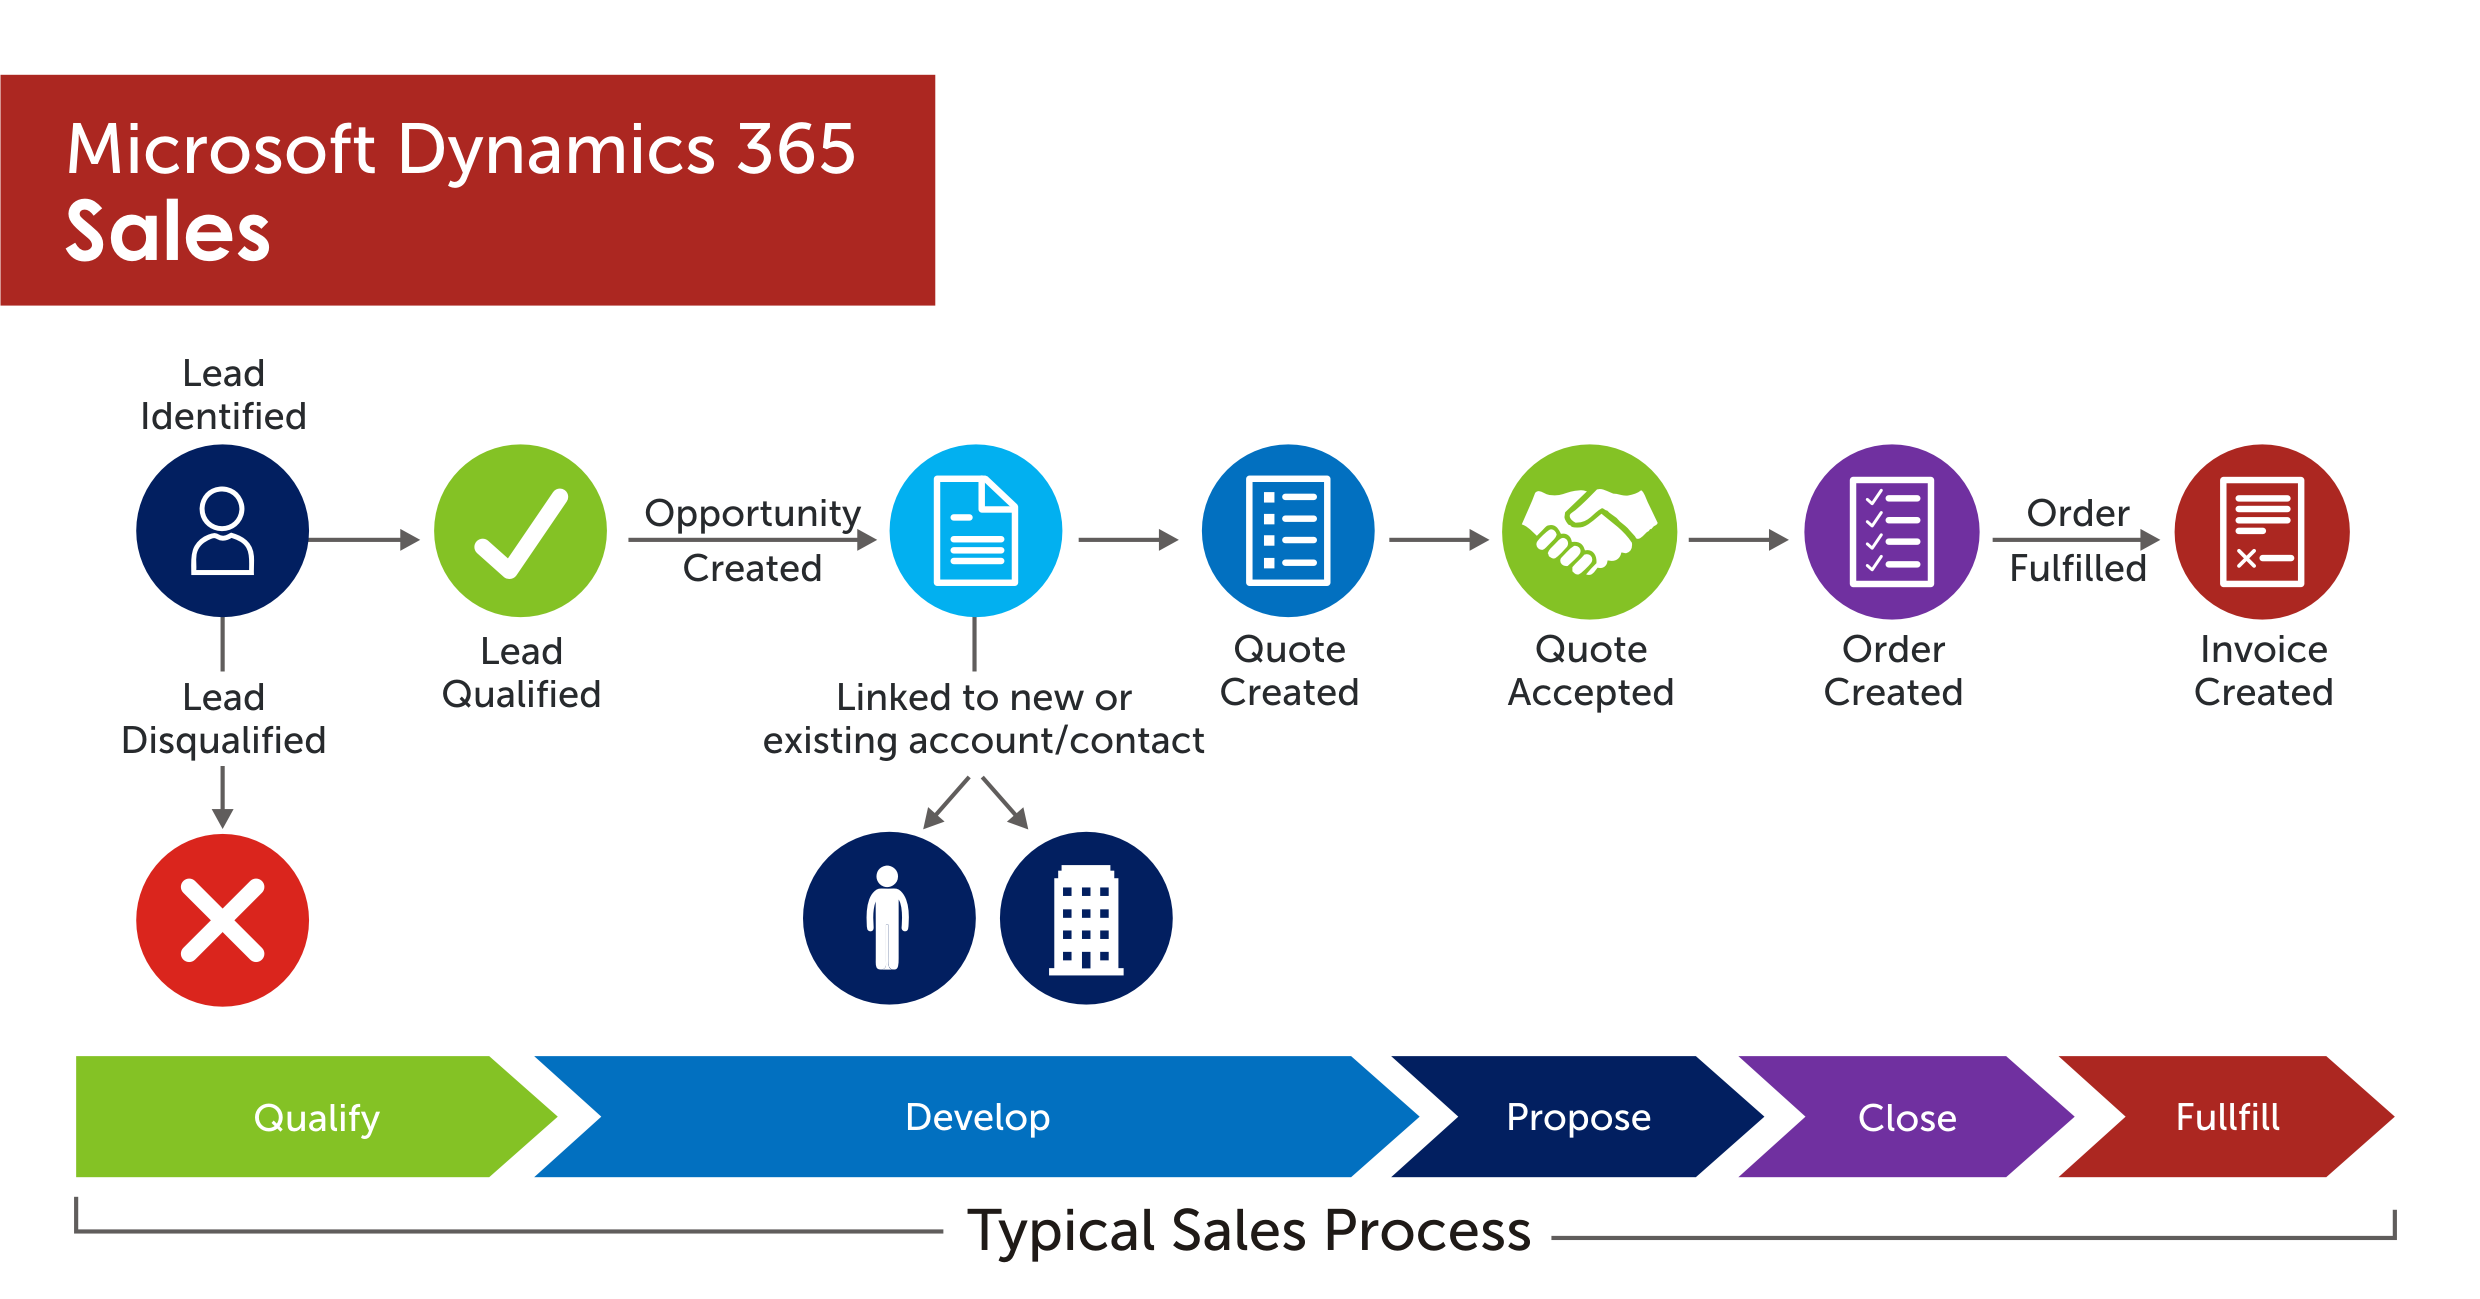 Dynamics 365 Sales is designed to help your sales team.